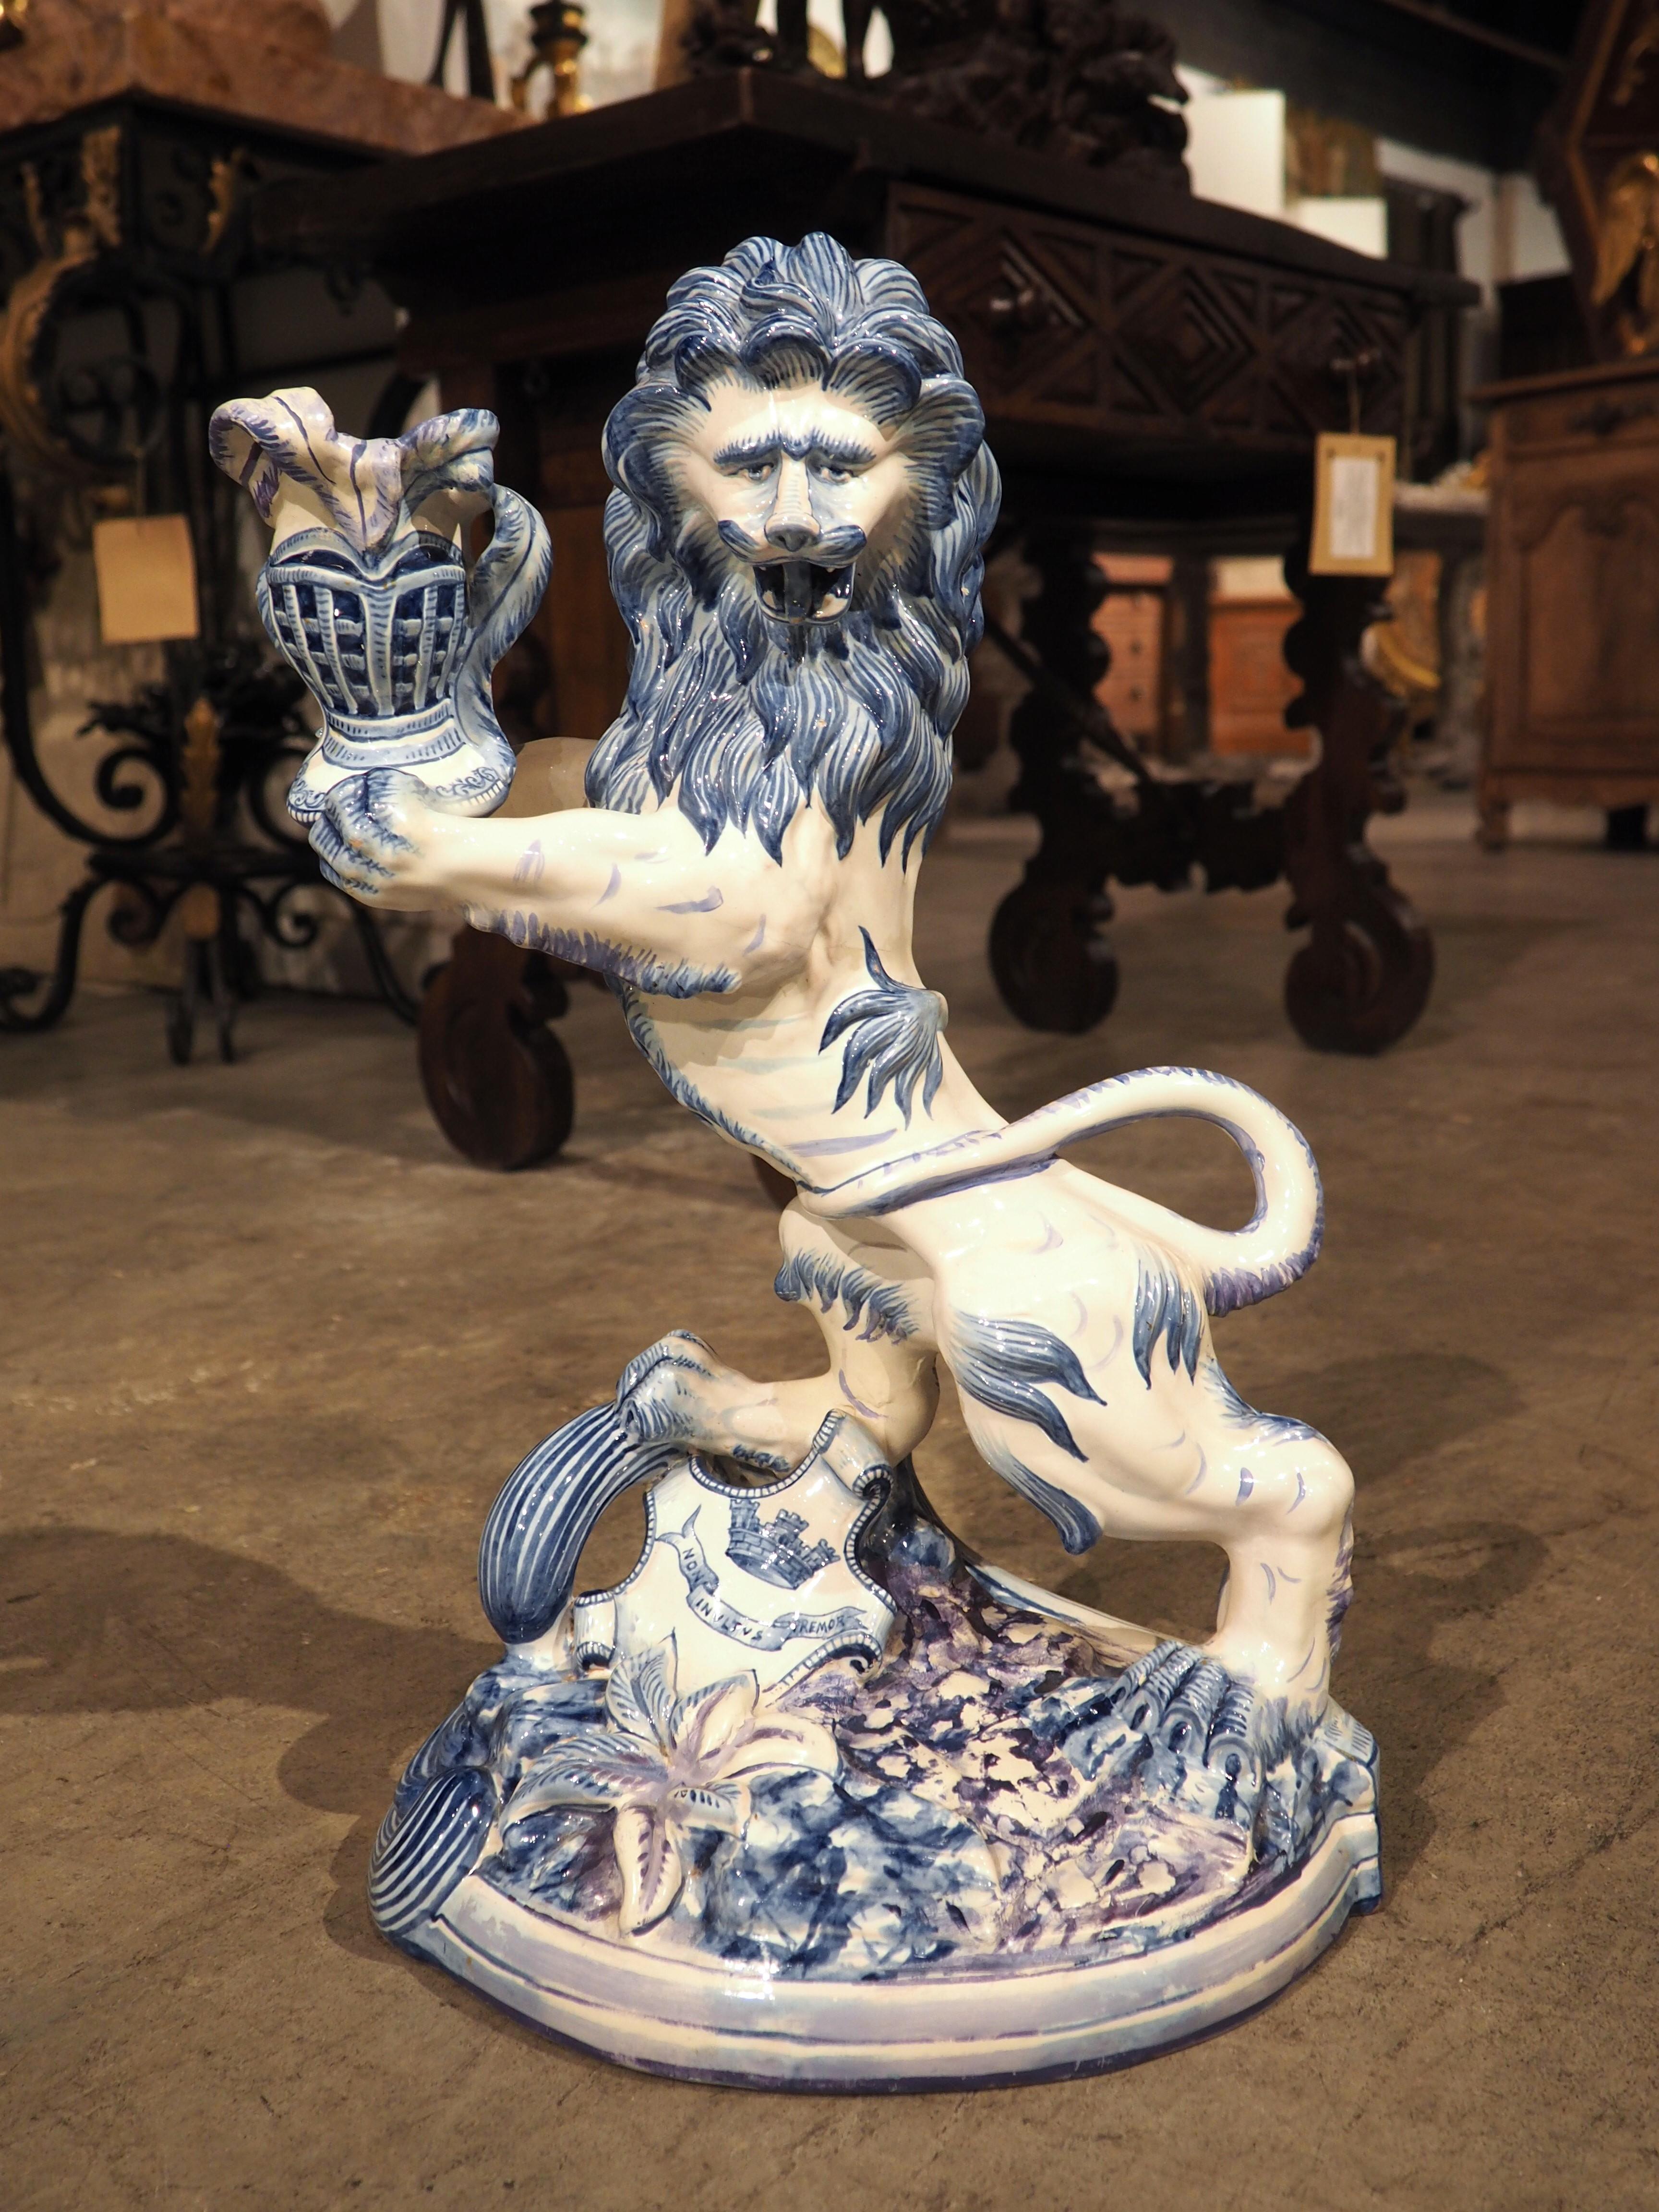 Featuring a beautiful hand-painted cobalt blue and white finish, this faience lion candle holder dates to circa 1890. Based on production marks on the back of the base, the candle holder was produced in Saint-Clément, by Keller & Guerin, which was